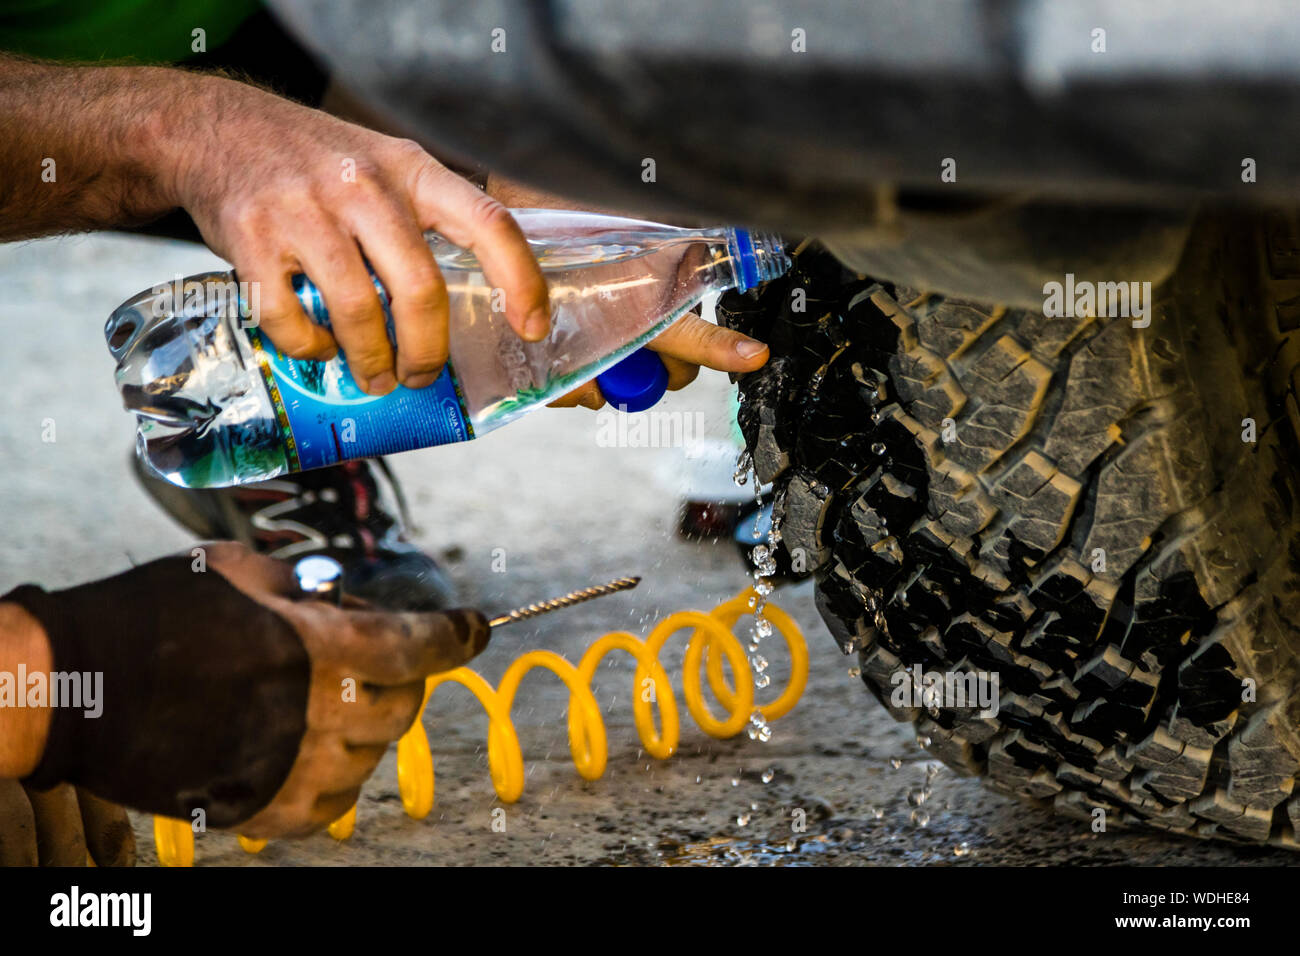 Expedition style tire repair on the Silk Road in Murghab, Tajikistan.  Compressor, water bottle, drill and a vulcanizable rubber thread are enough  for the tire to last another 1,000 kilometers on gravel